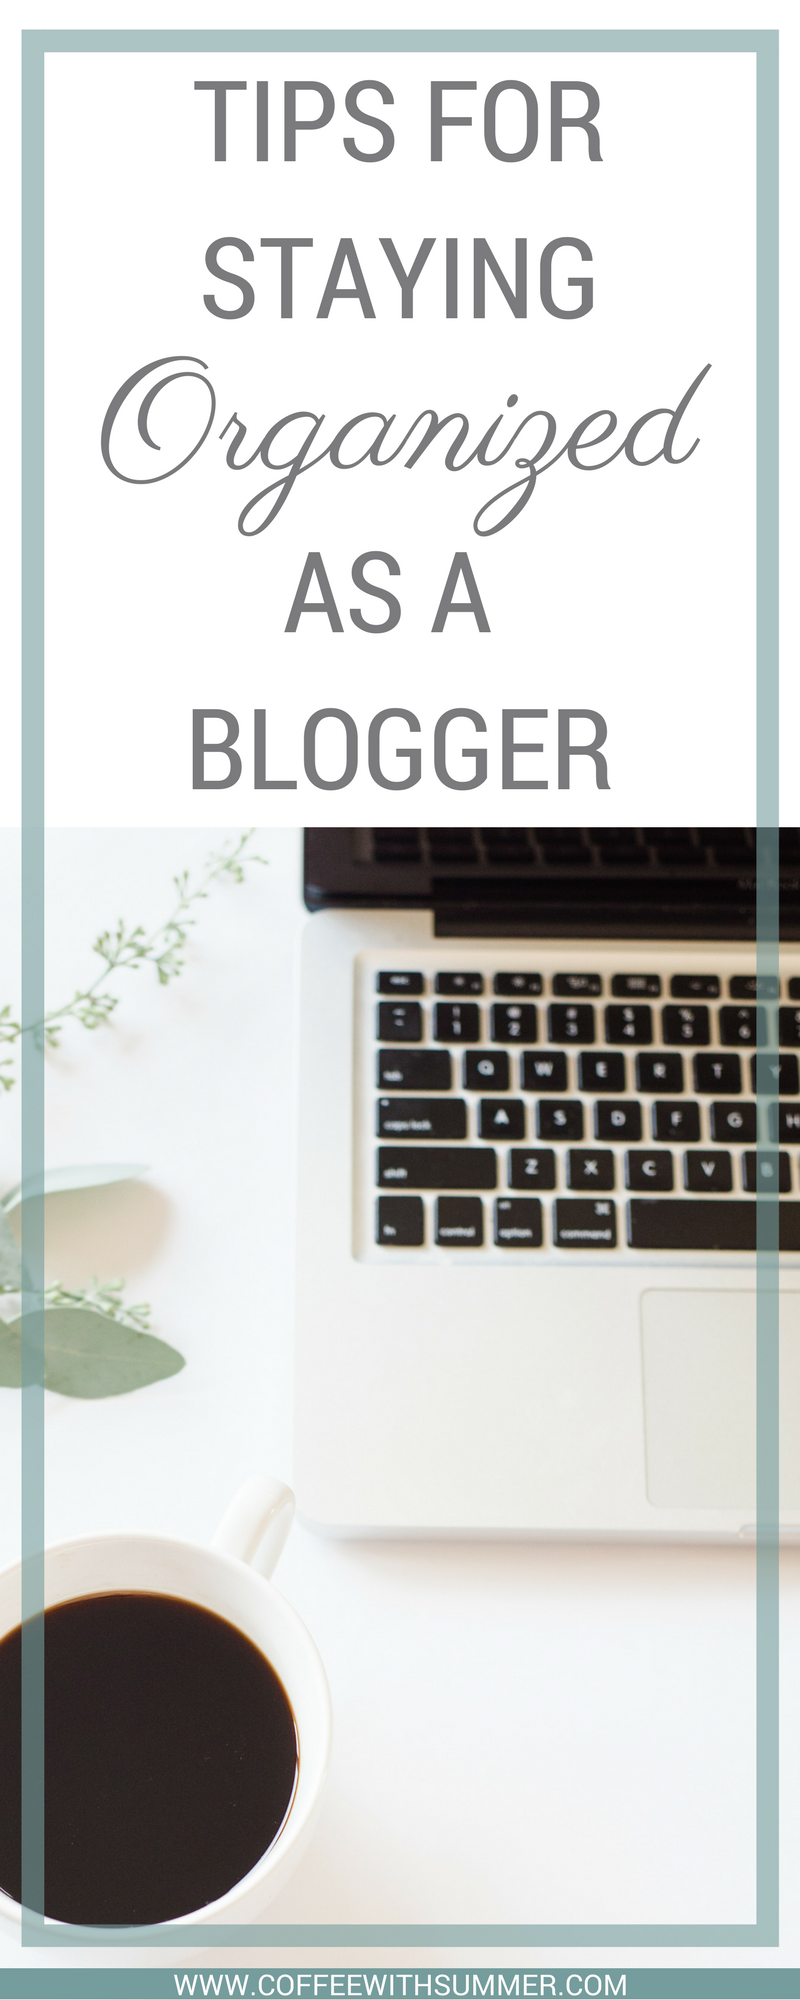 Tips For Staying Organized As A Blogger